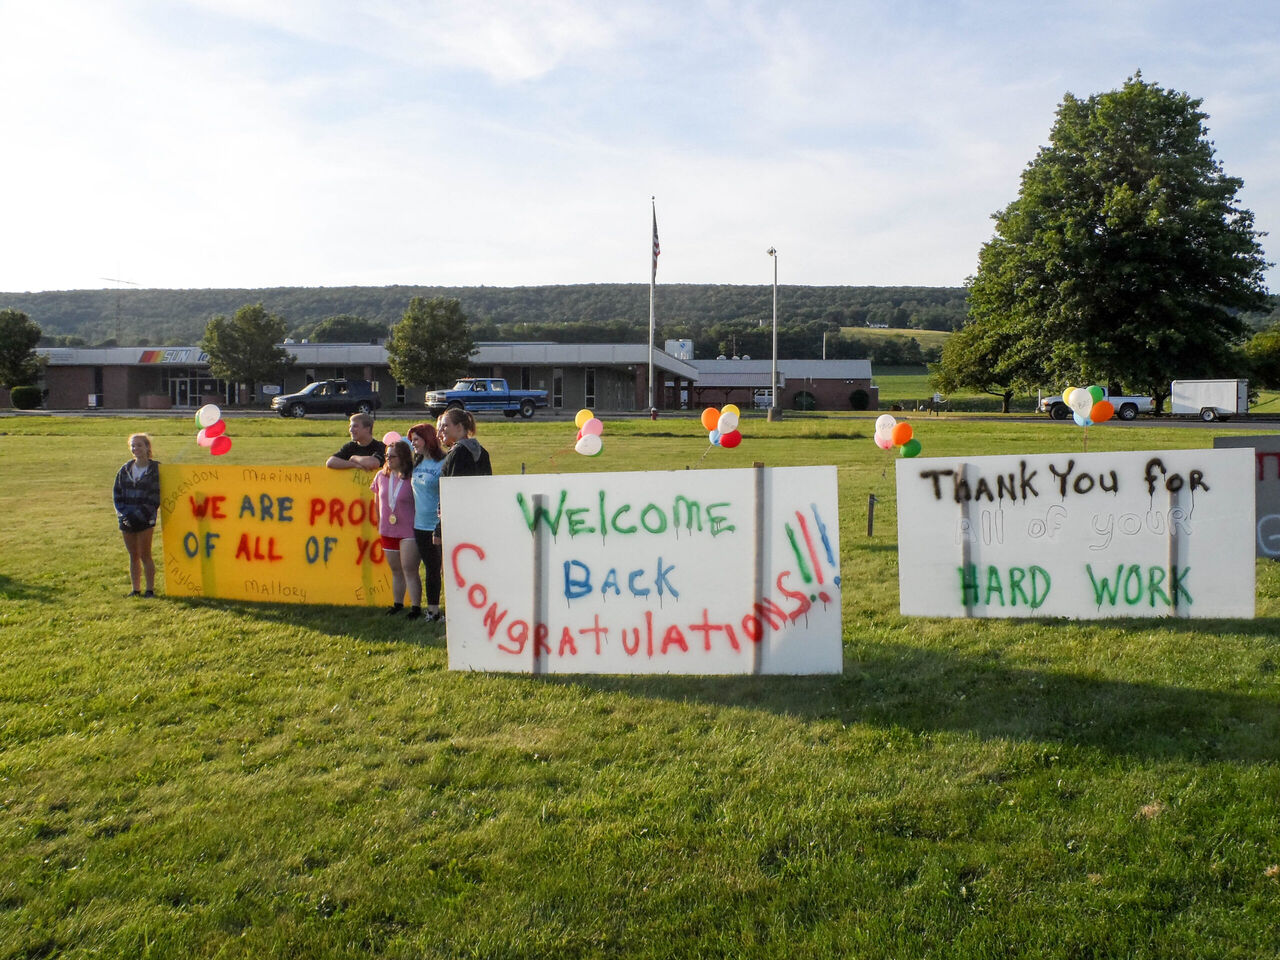 Family and friends greeted our competitors when they returned from the SkillsUSA Nationals in Kansas City.